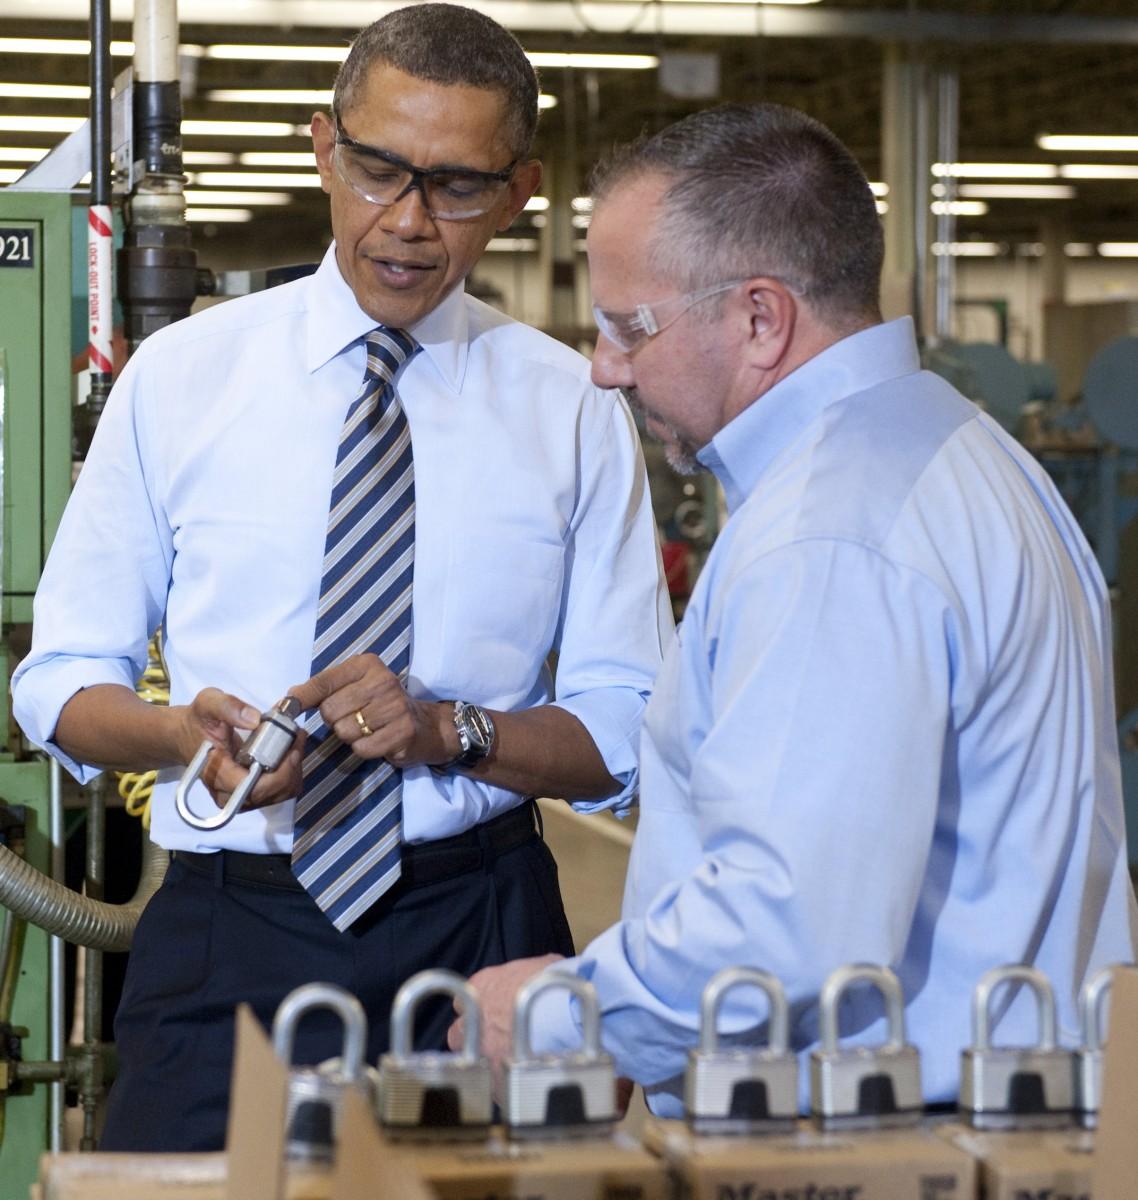 <a><img class="size-large wp-image-1791629" title="US President Barack Obama (L) examines a" src="https://www.theepochtimes.com/assets/uploads/2015/09/139034705.jpg" alt="" width="335" height="354"/></a>